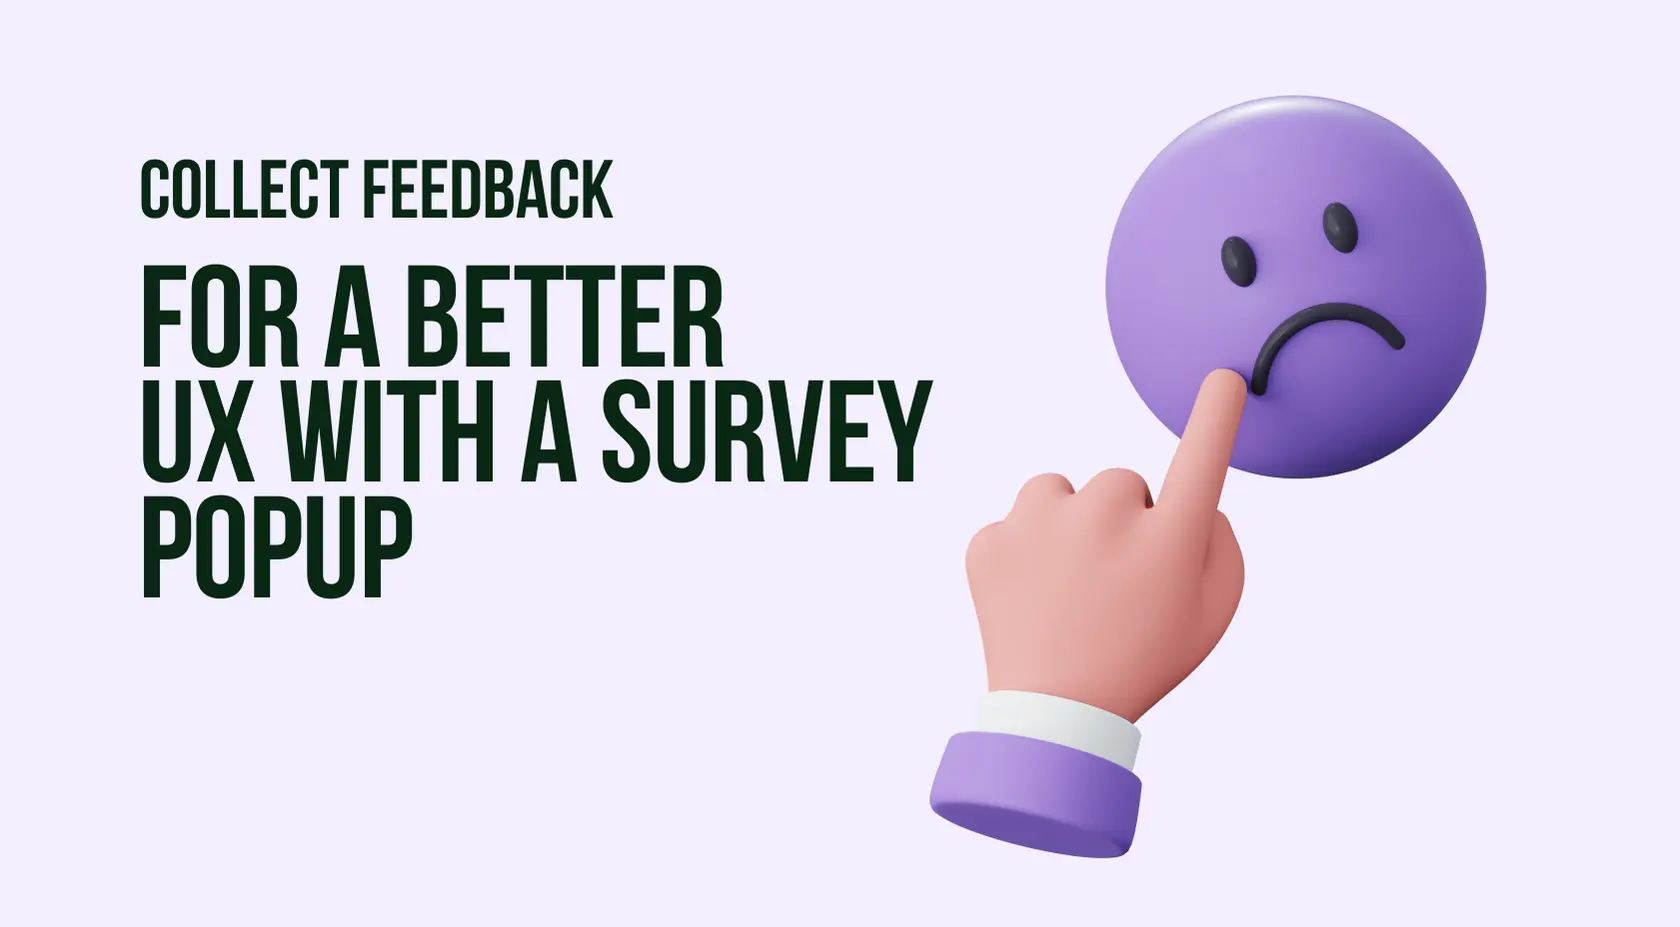 Collect Feedback for a Better UX with a Survey Popup